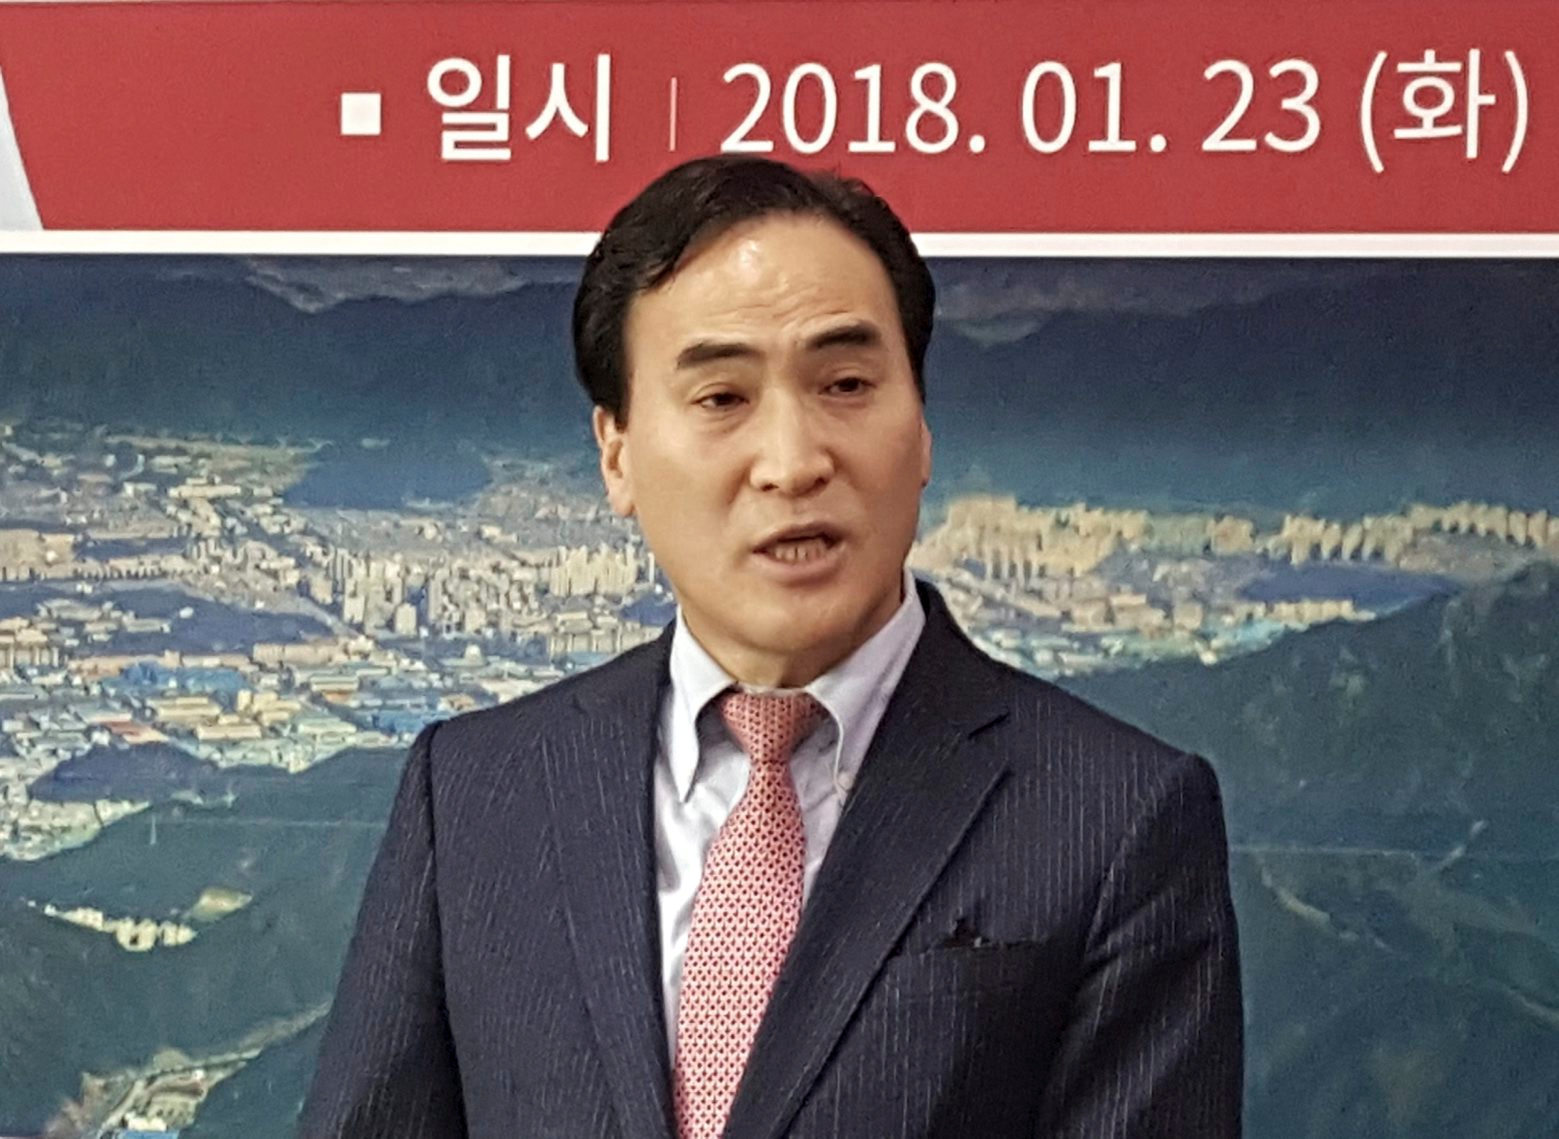 In this Jan. 23, 2018, photo, Kim Jong Yang, the senior vice president of Interpol executive committee, speaks during a press conference in Changwon, South Korea. On Wednesday, Nov. 21, 2028, Interpol elected Kim Jong Yang as its president in a blow to Russian efforts at naming one of their own. (Kang Kyung-kook/Newsis via AP) South Korea Interpol President